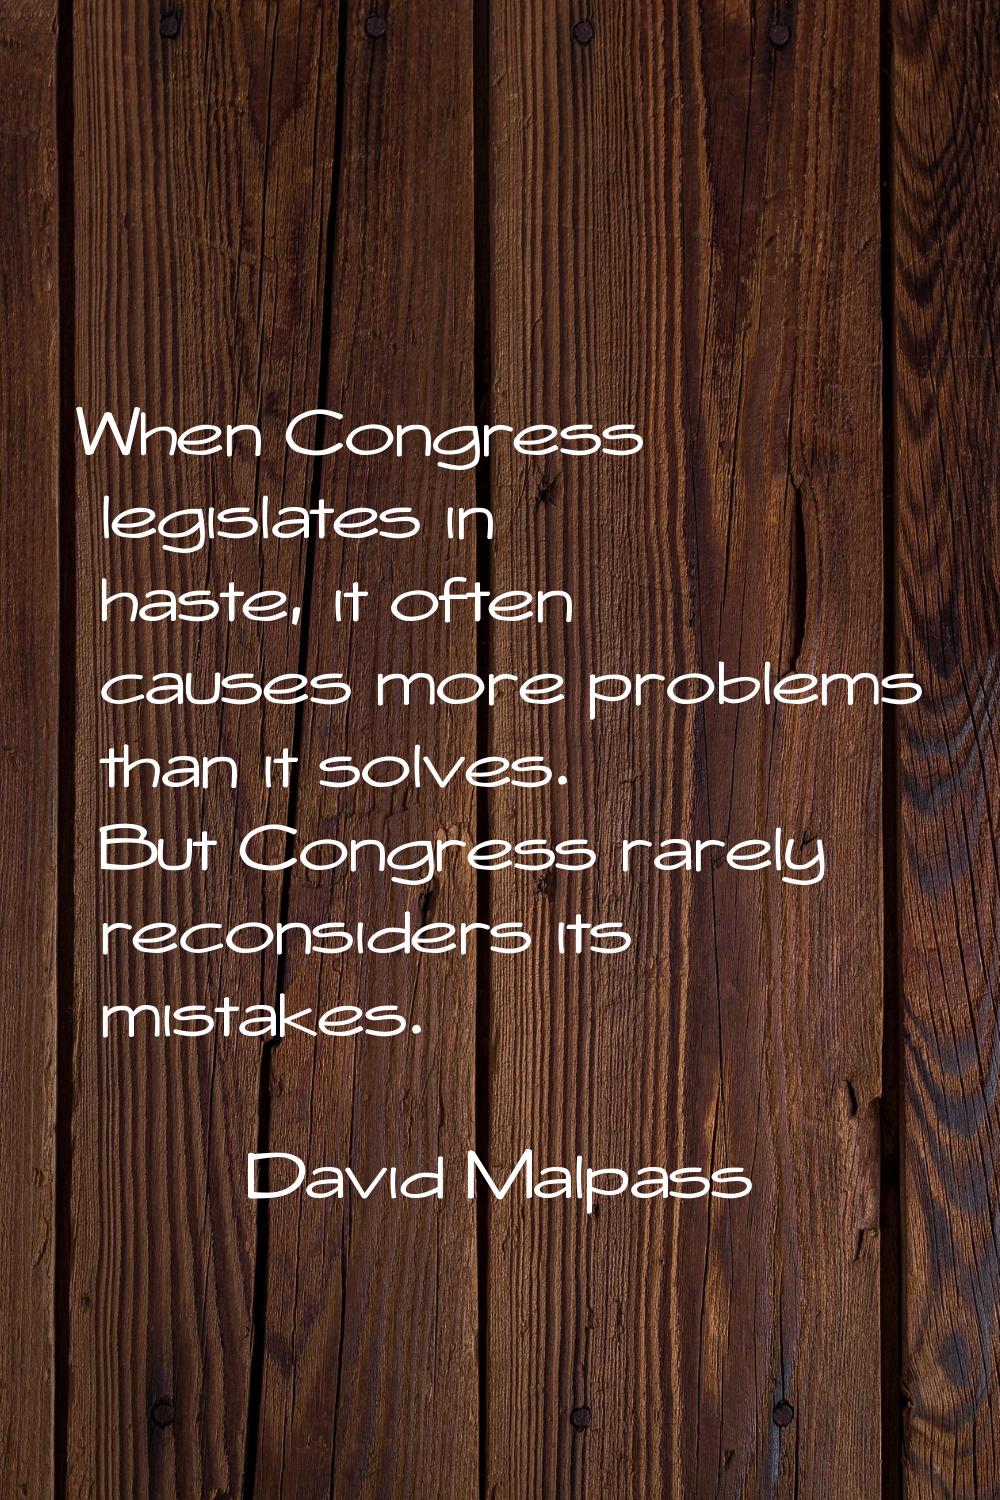 When Congress legislates in haste, it often causes more problems than it solves. But Congress rarel